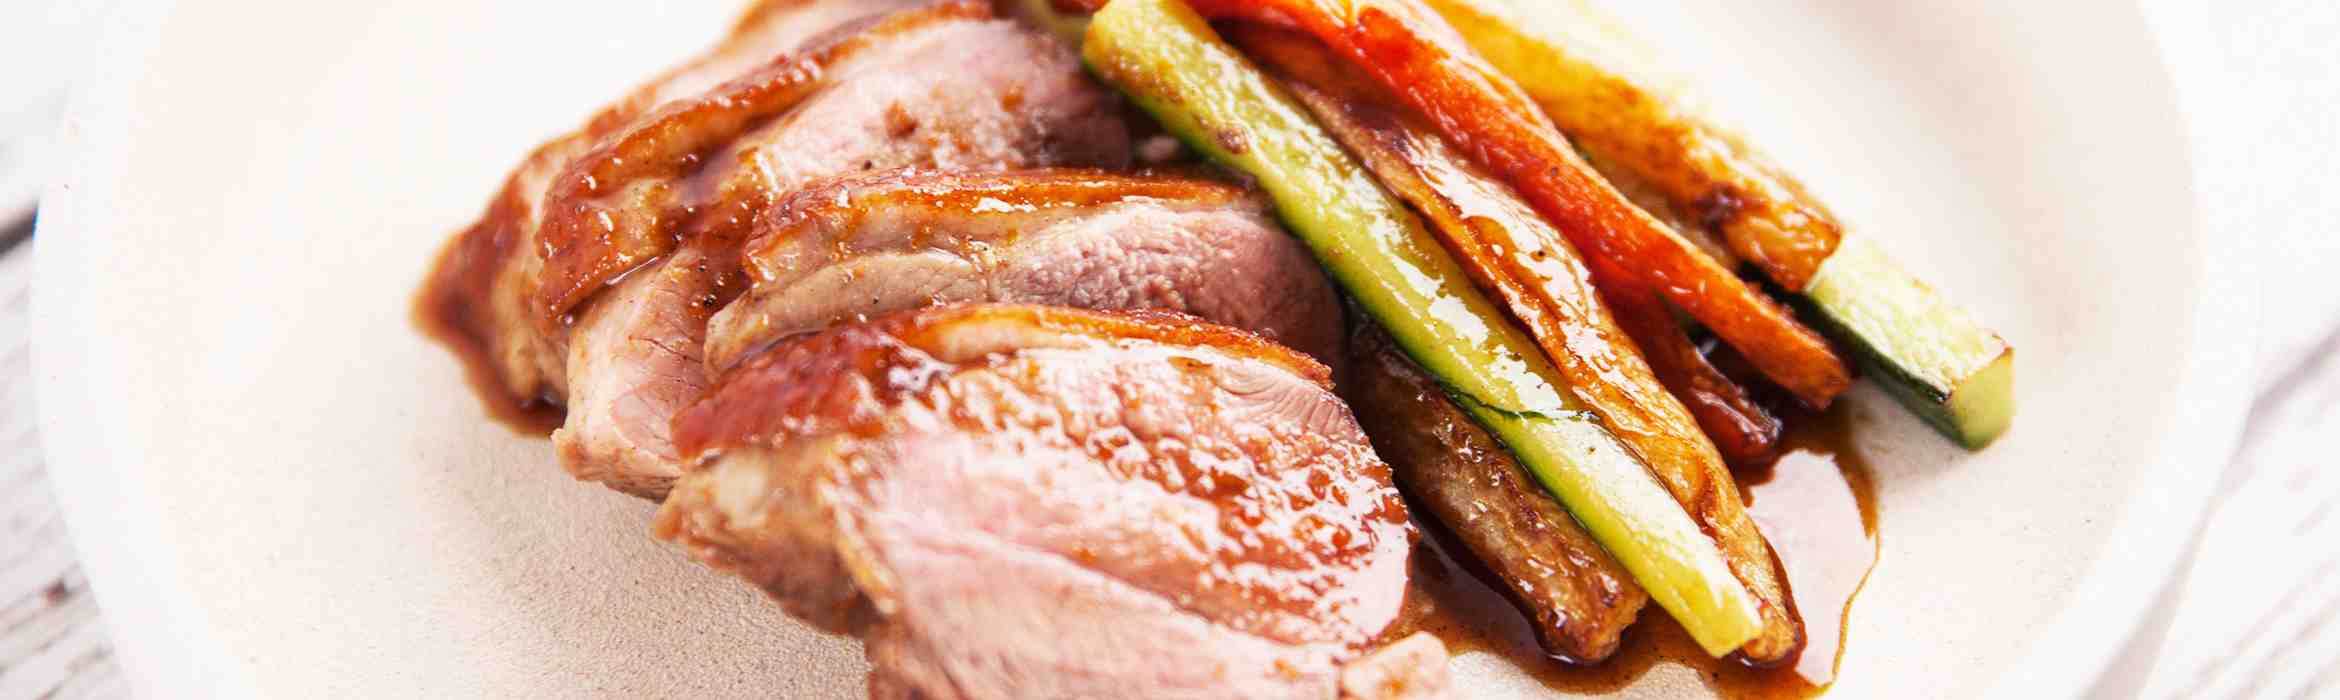 Honey Soy Duck Breast with Seared Vegetables Recipe